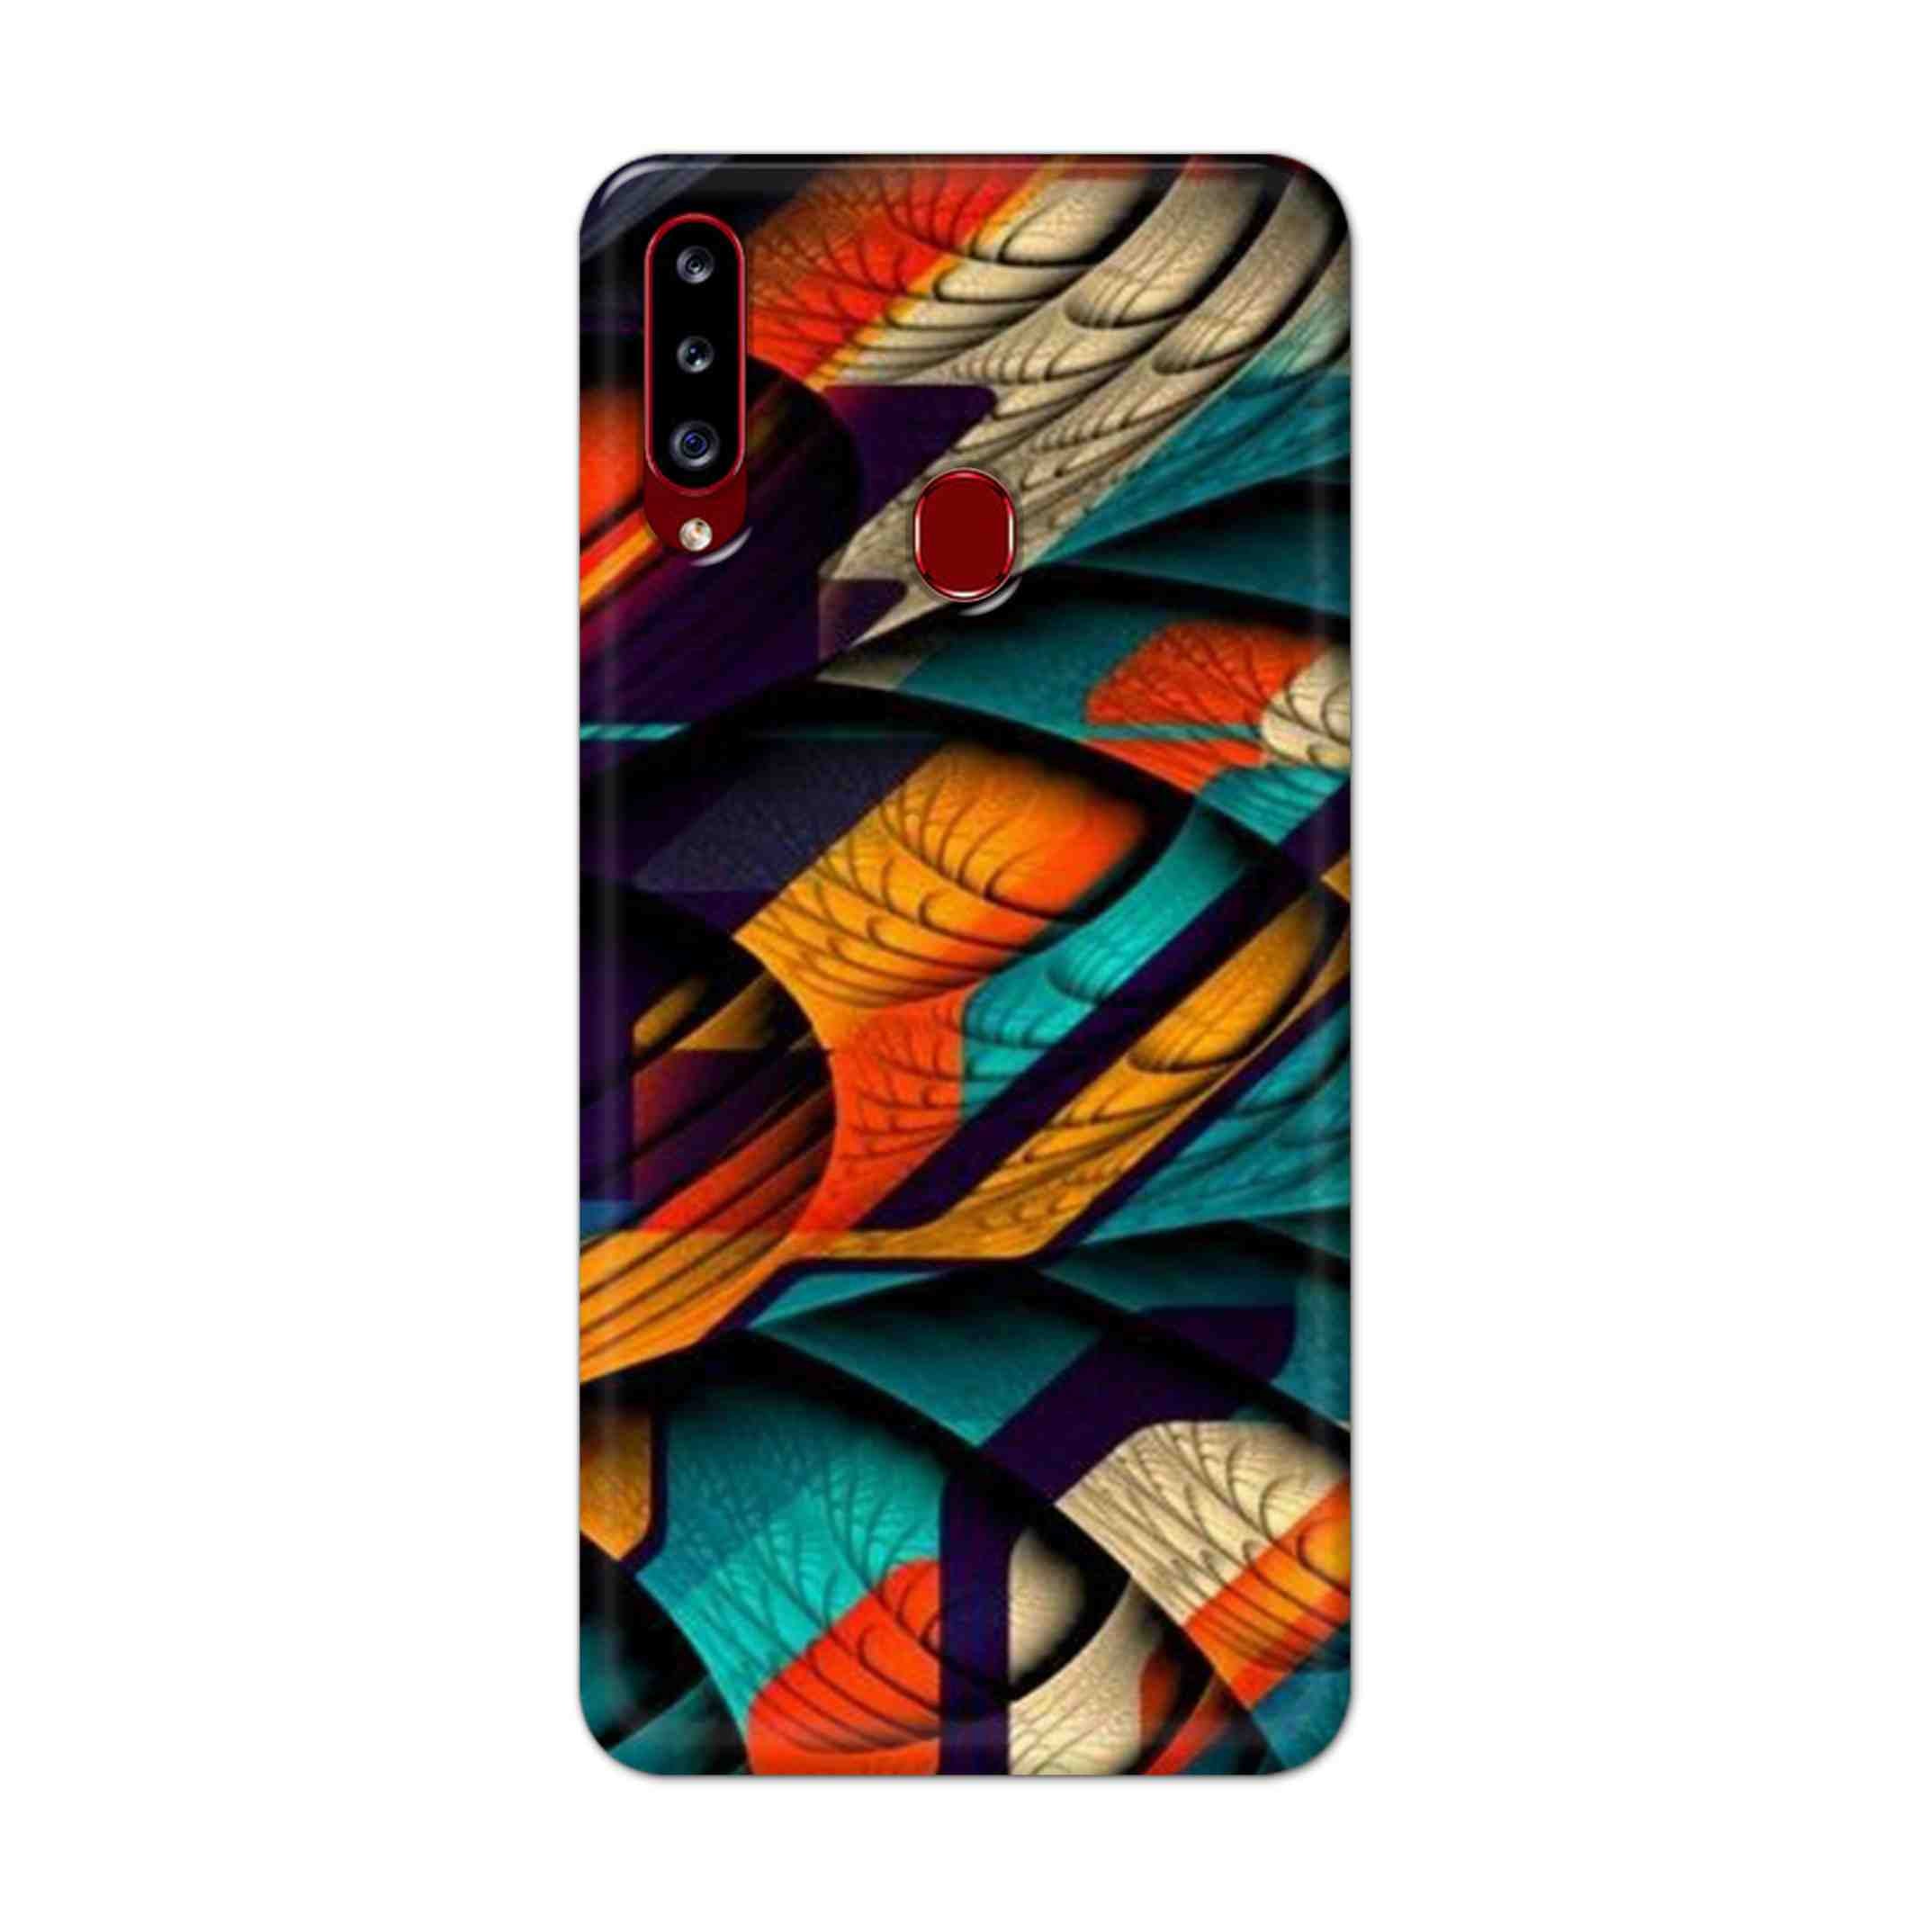 Buy Colour Abstract Hard Back Mobile Phone Case Cover For Samsung A20s Online